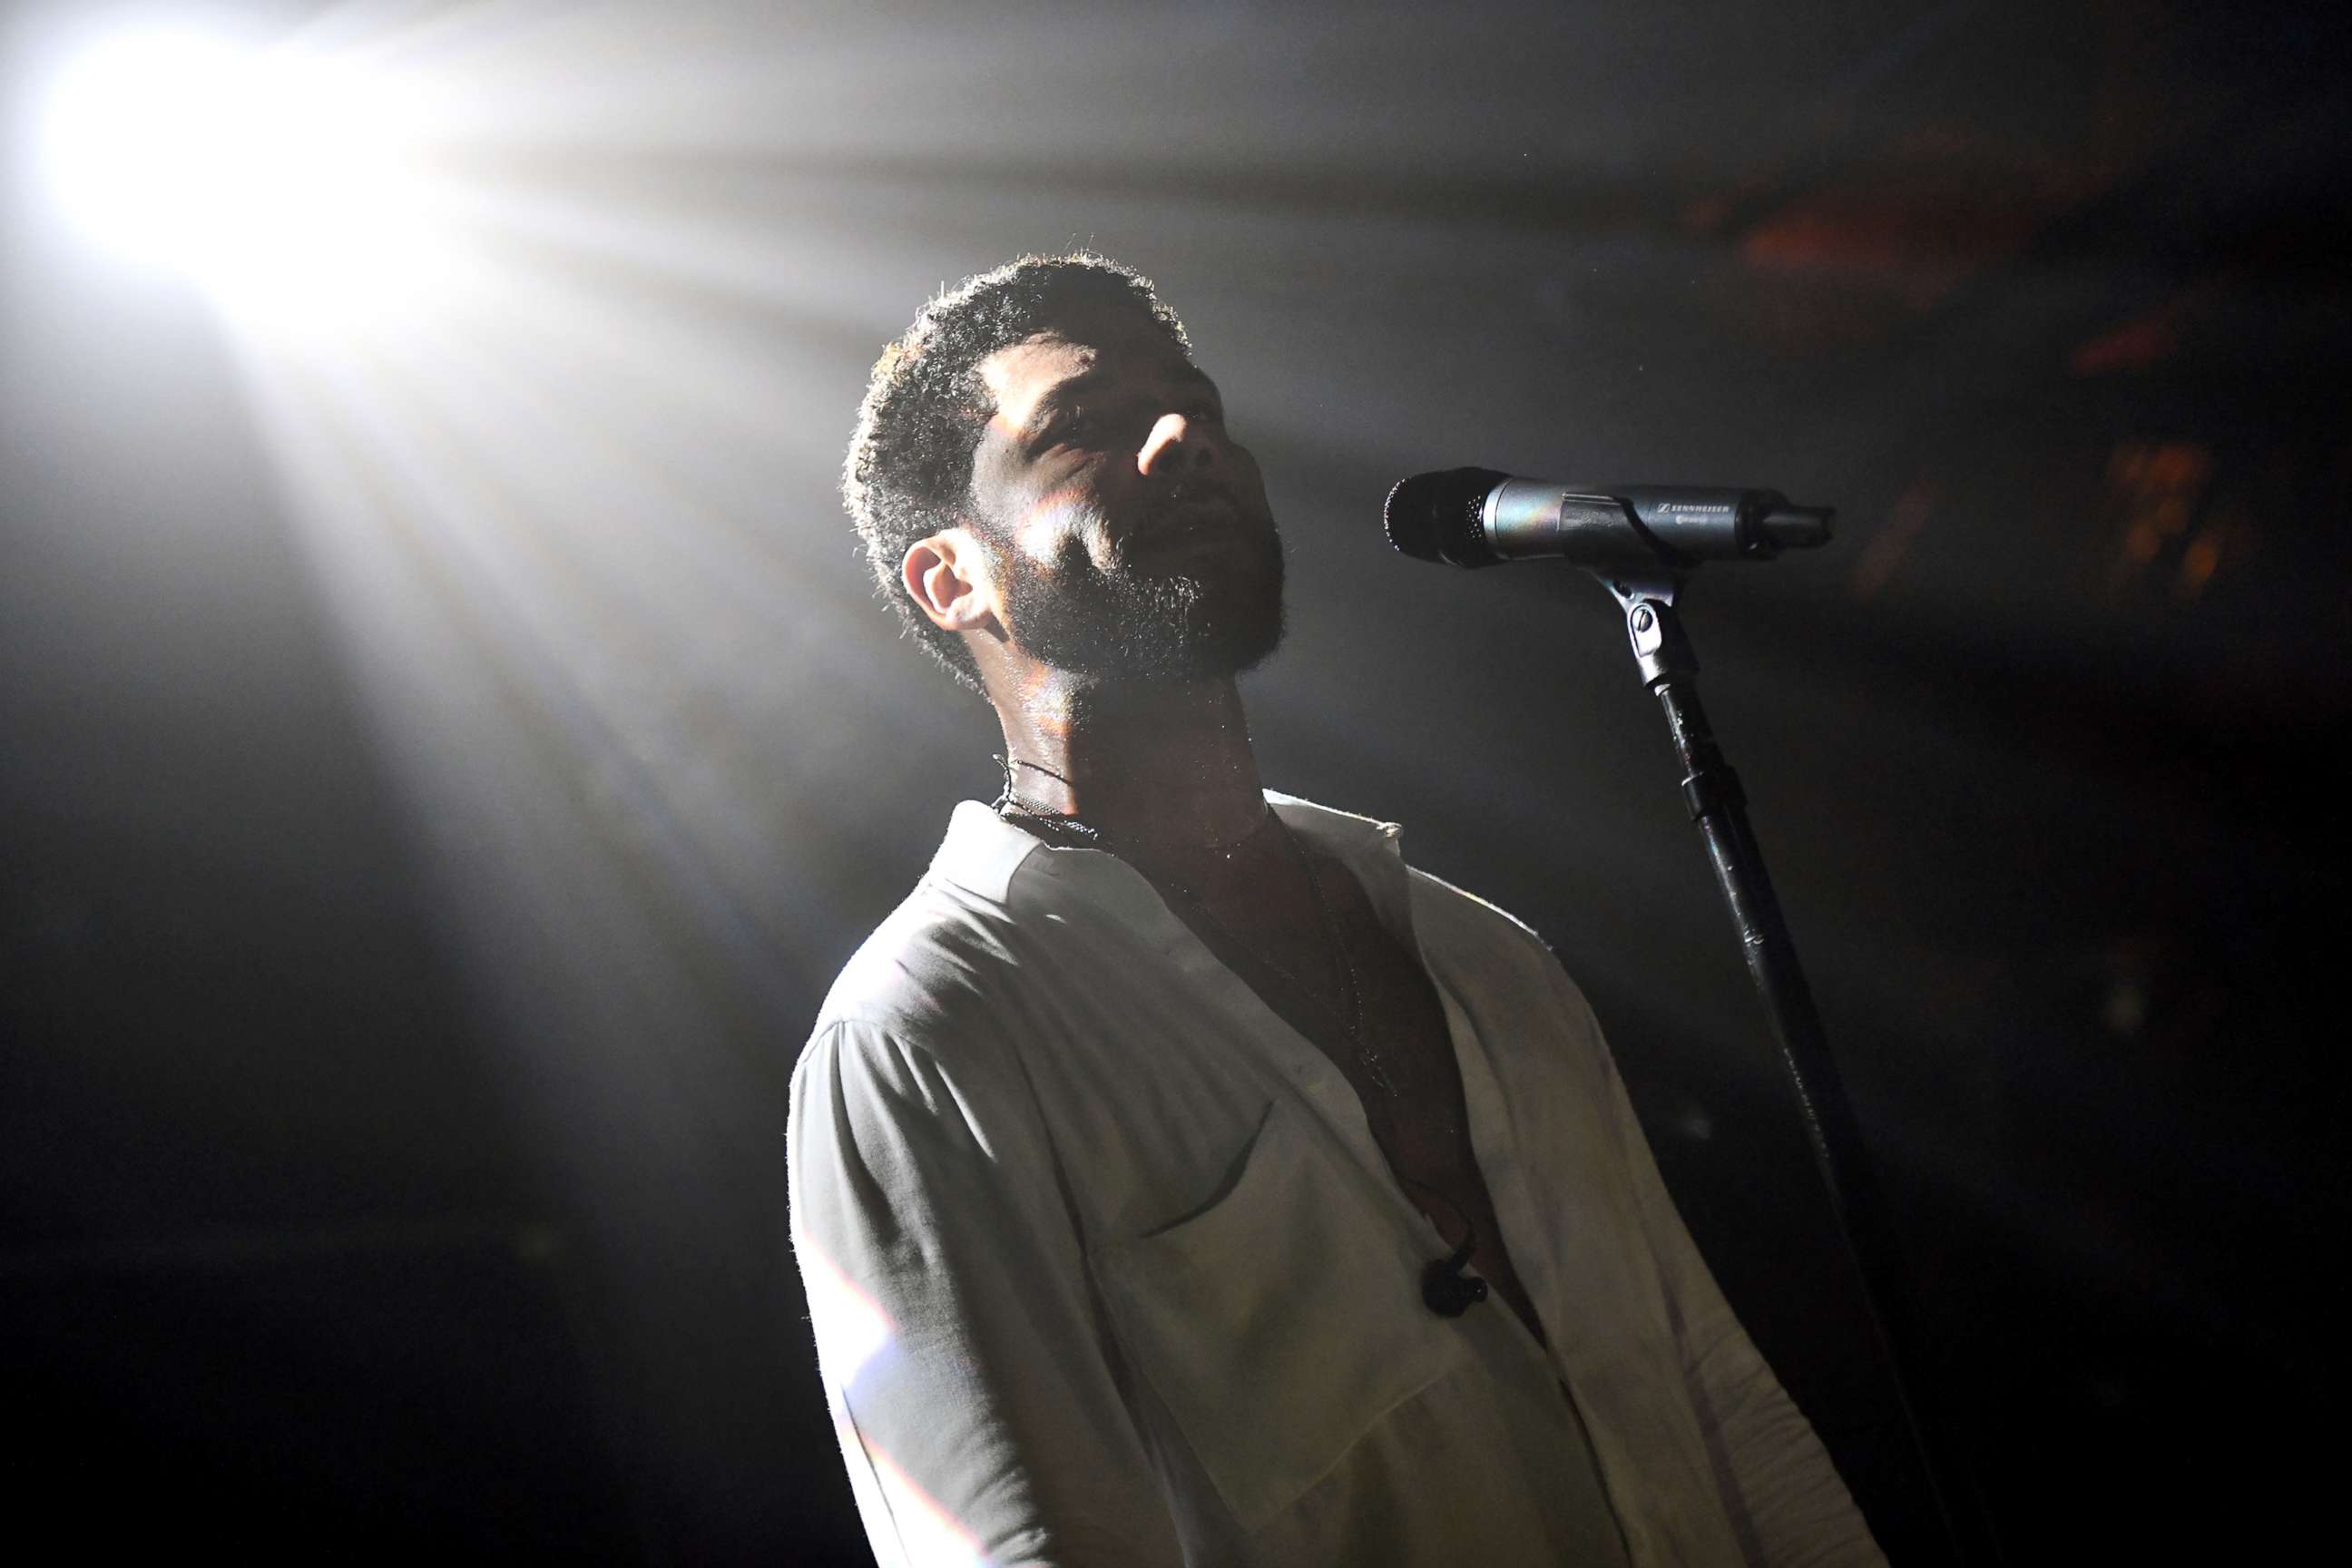 PHOTO: Singer Jussie Smollett performs onstage at Troubadour on Feb. 2, 2019 in West Hollywood, Calif.